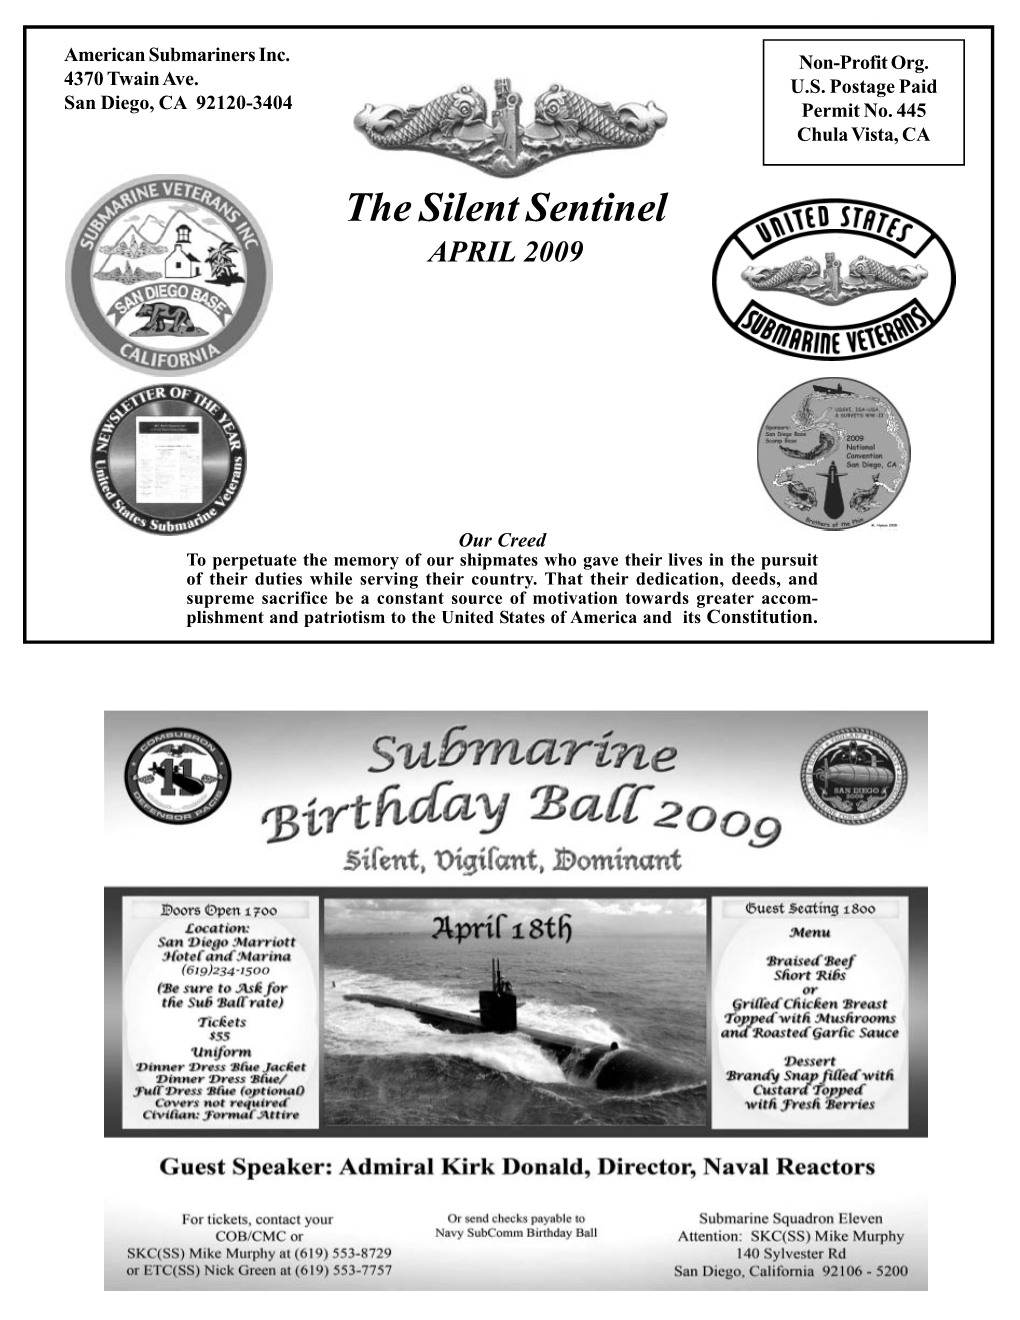 The Silent Sentinel April 2009 Page 1 American Submariners Inc